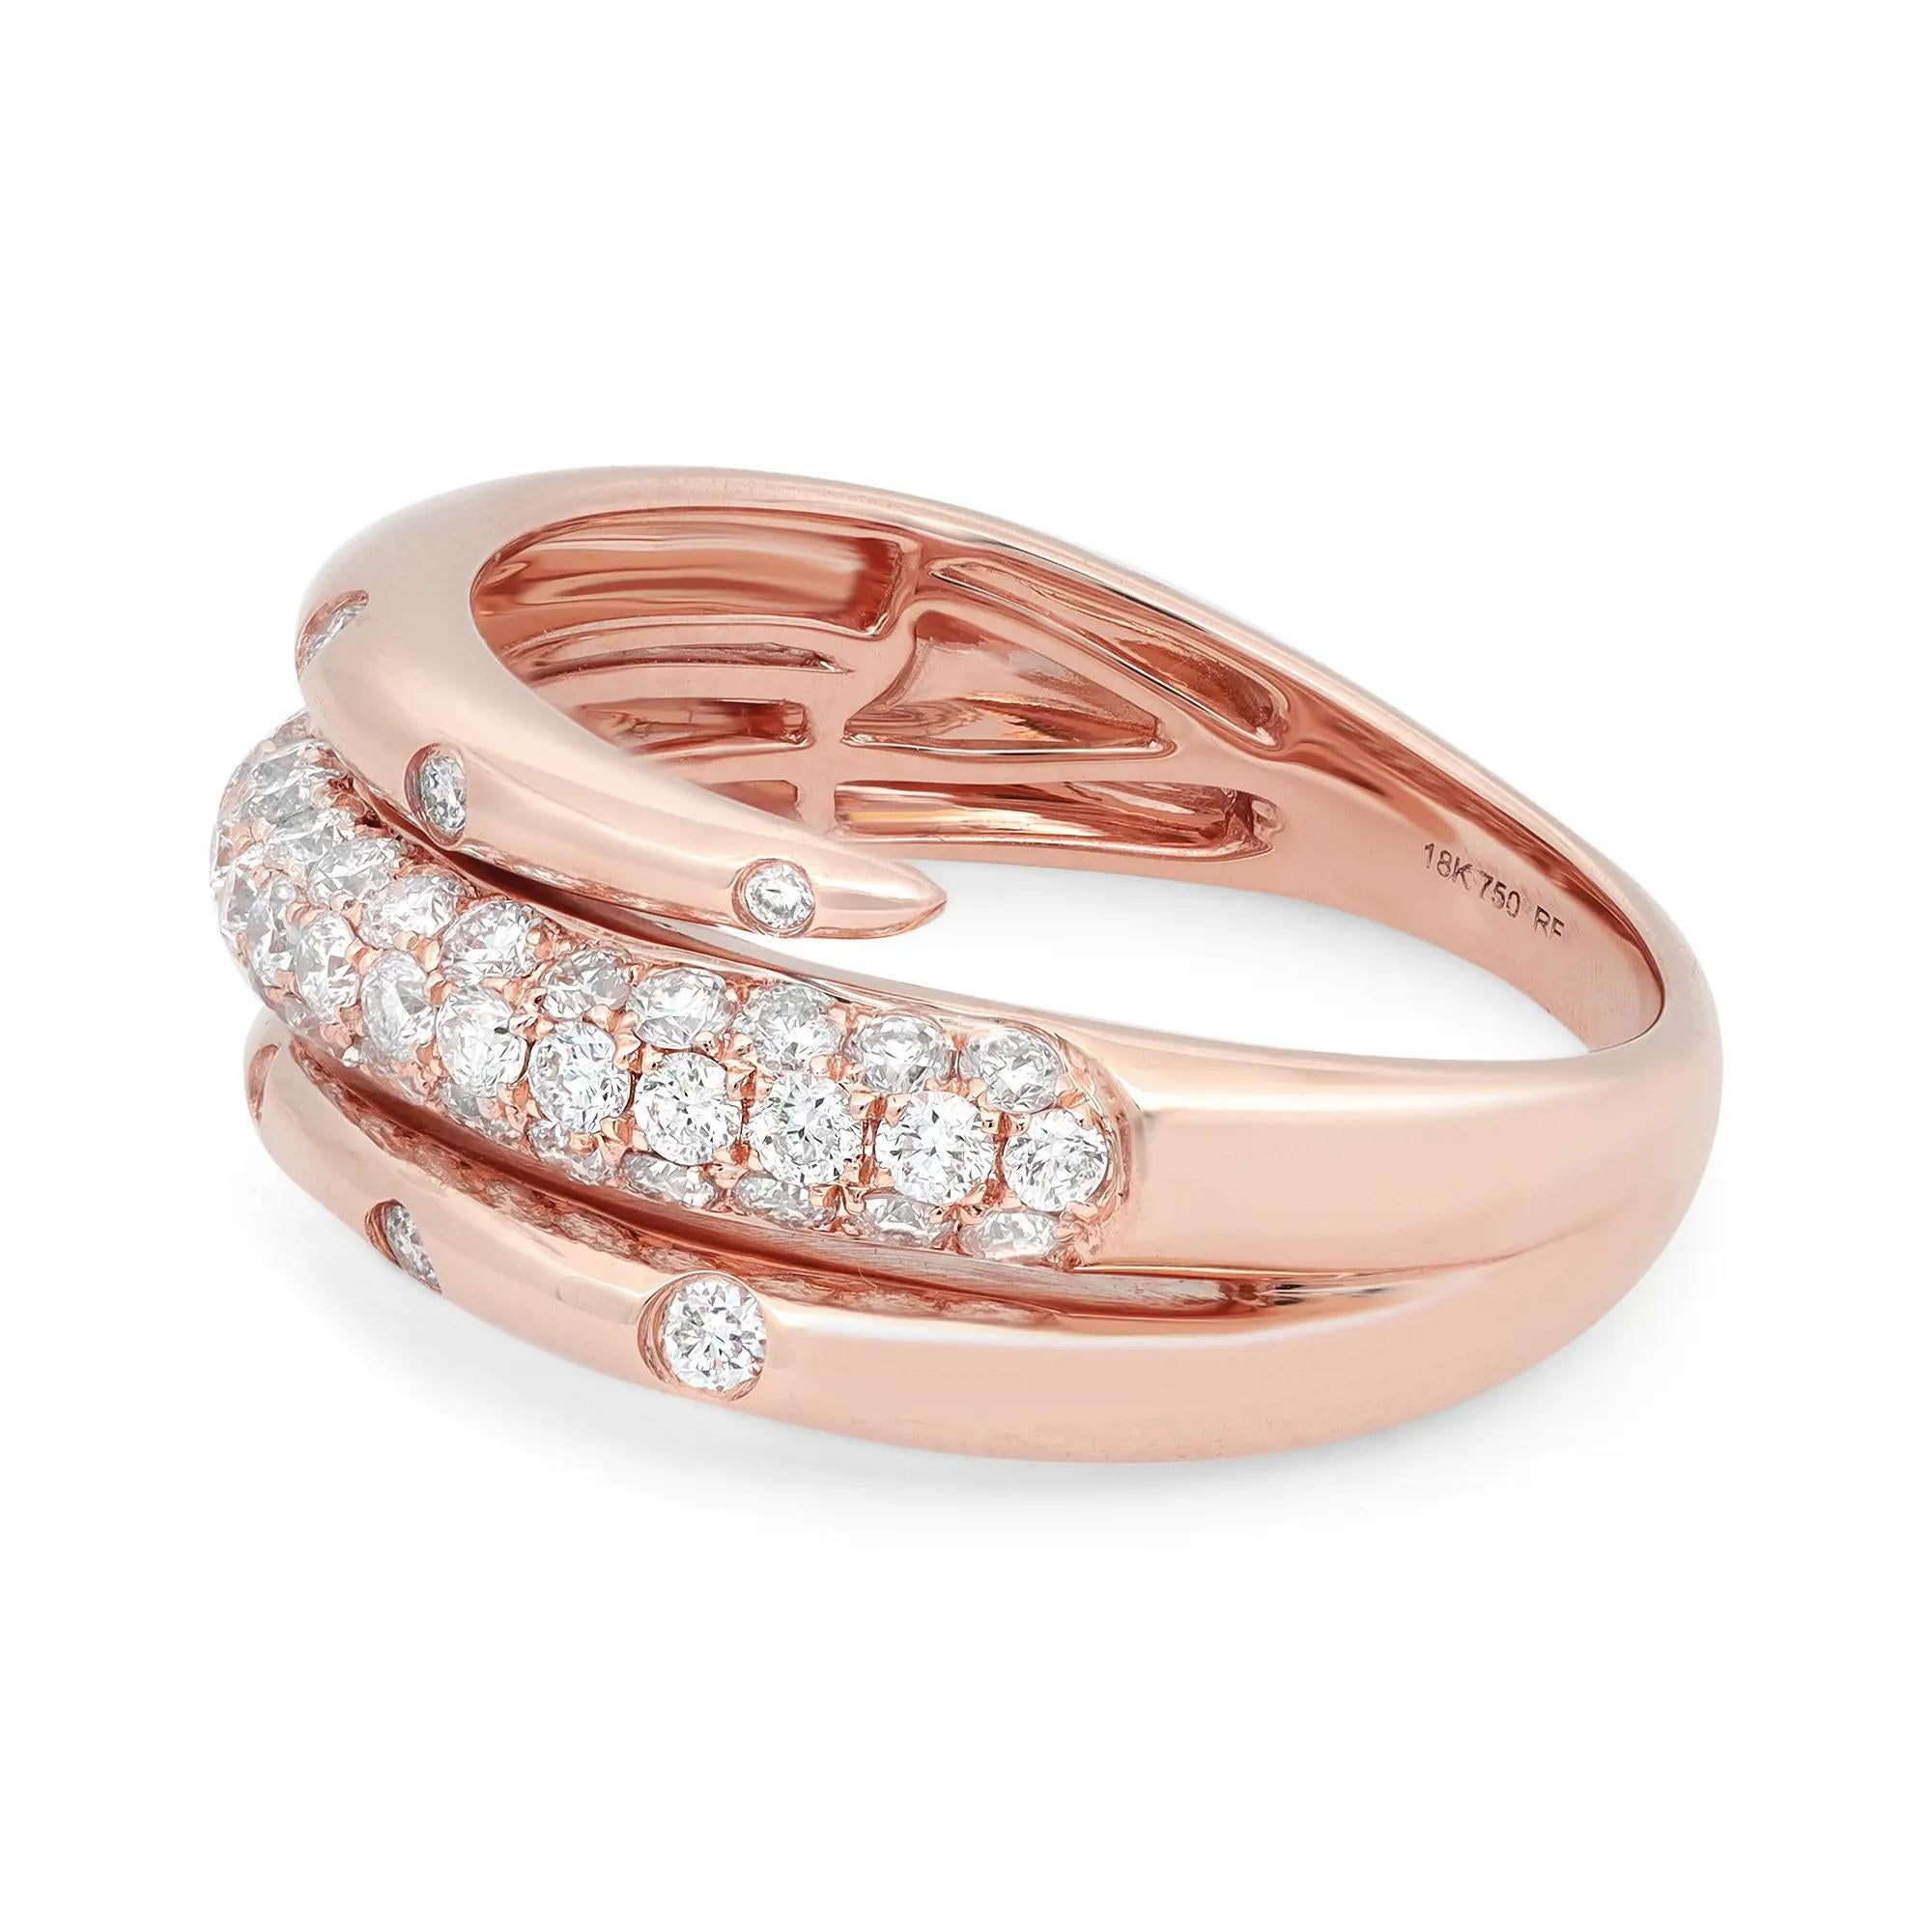 Rachel Koen 0.77Cttw Round Cut Diamond Spiral Band Ring 18K Rose Gold In New Condition For Sale In New York, NY